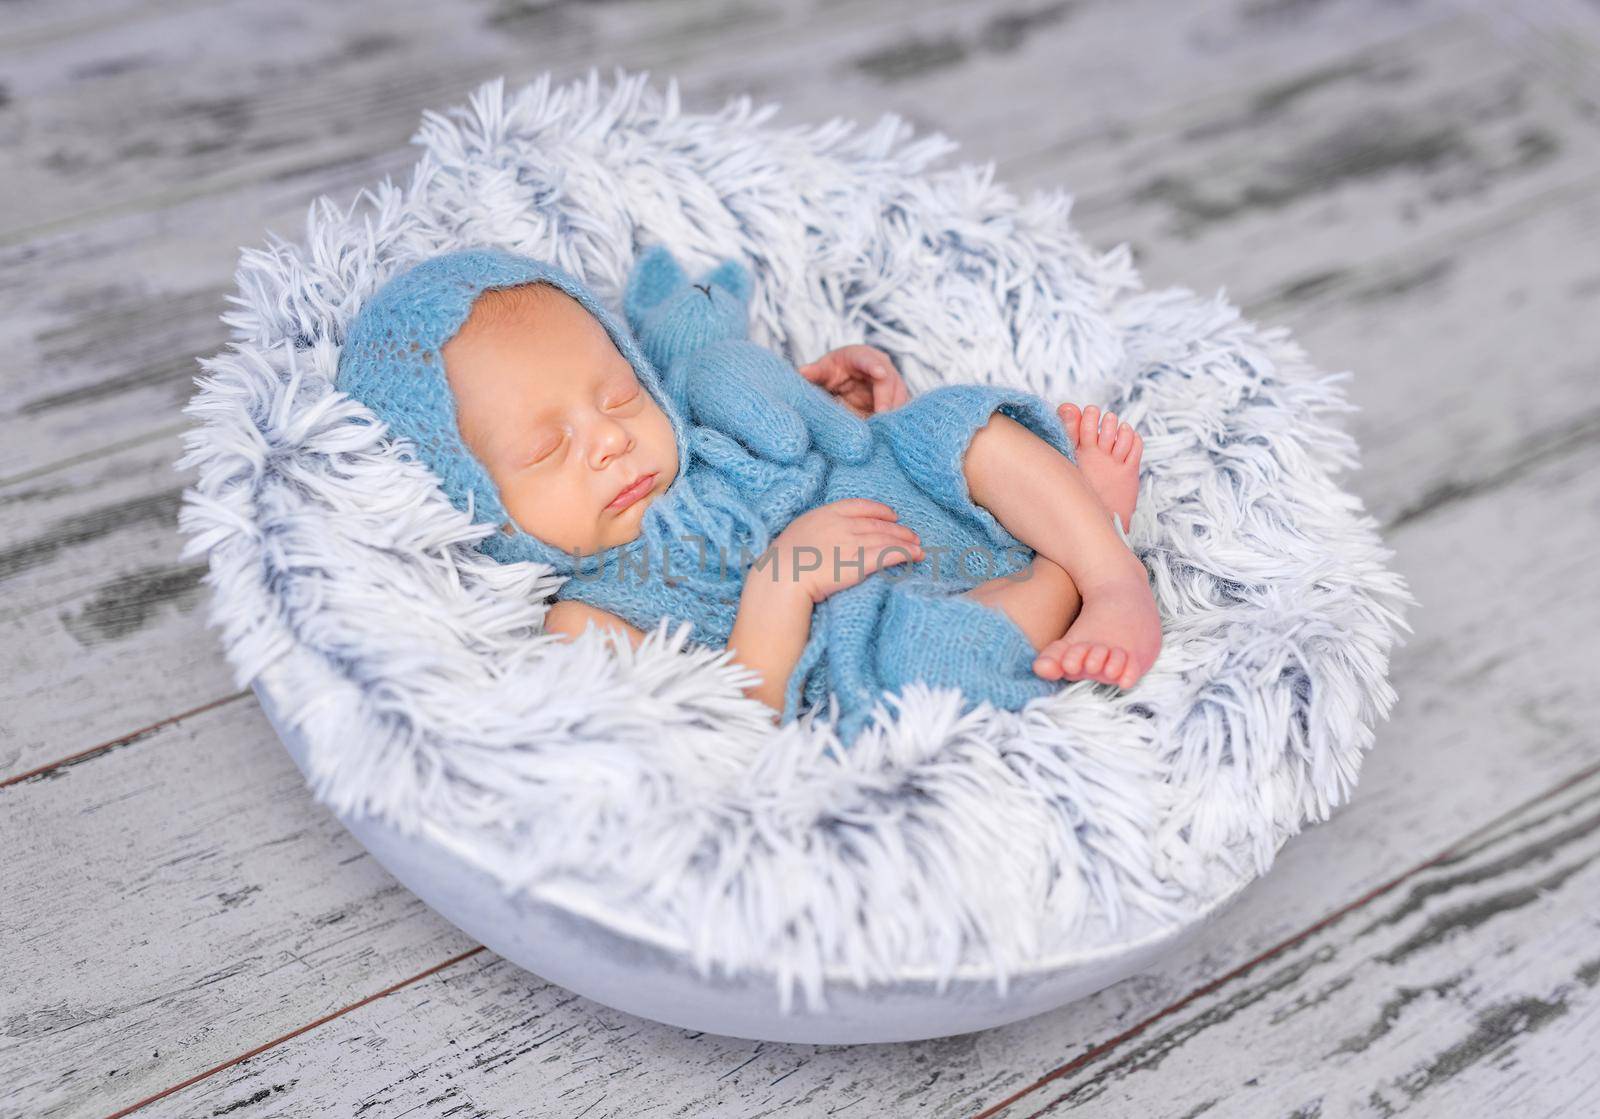 lovely infant in hat and jumpsuit sleeping on round bed by tan4ikk1